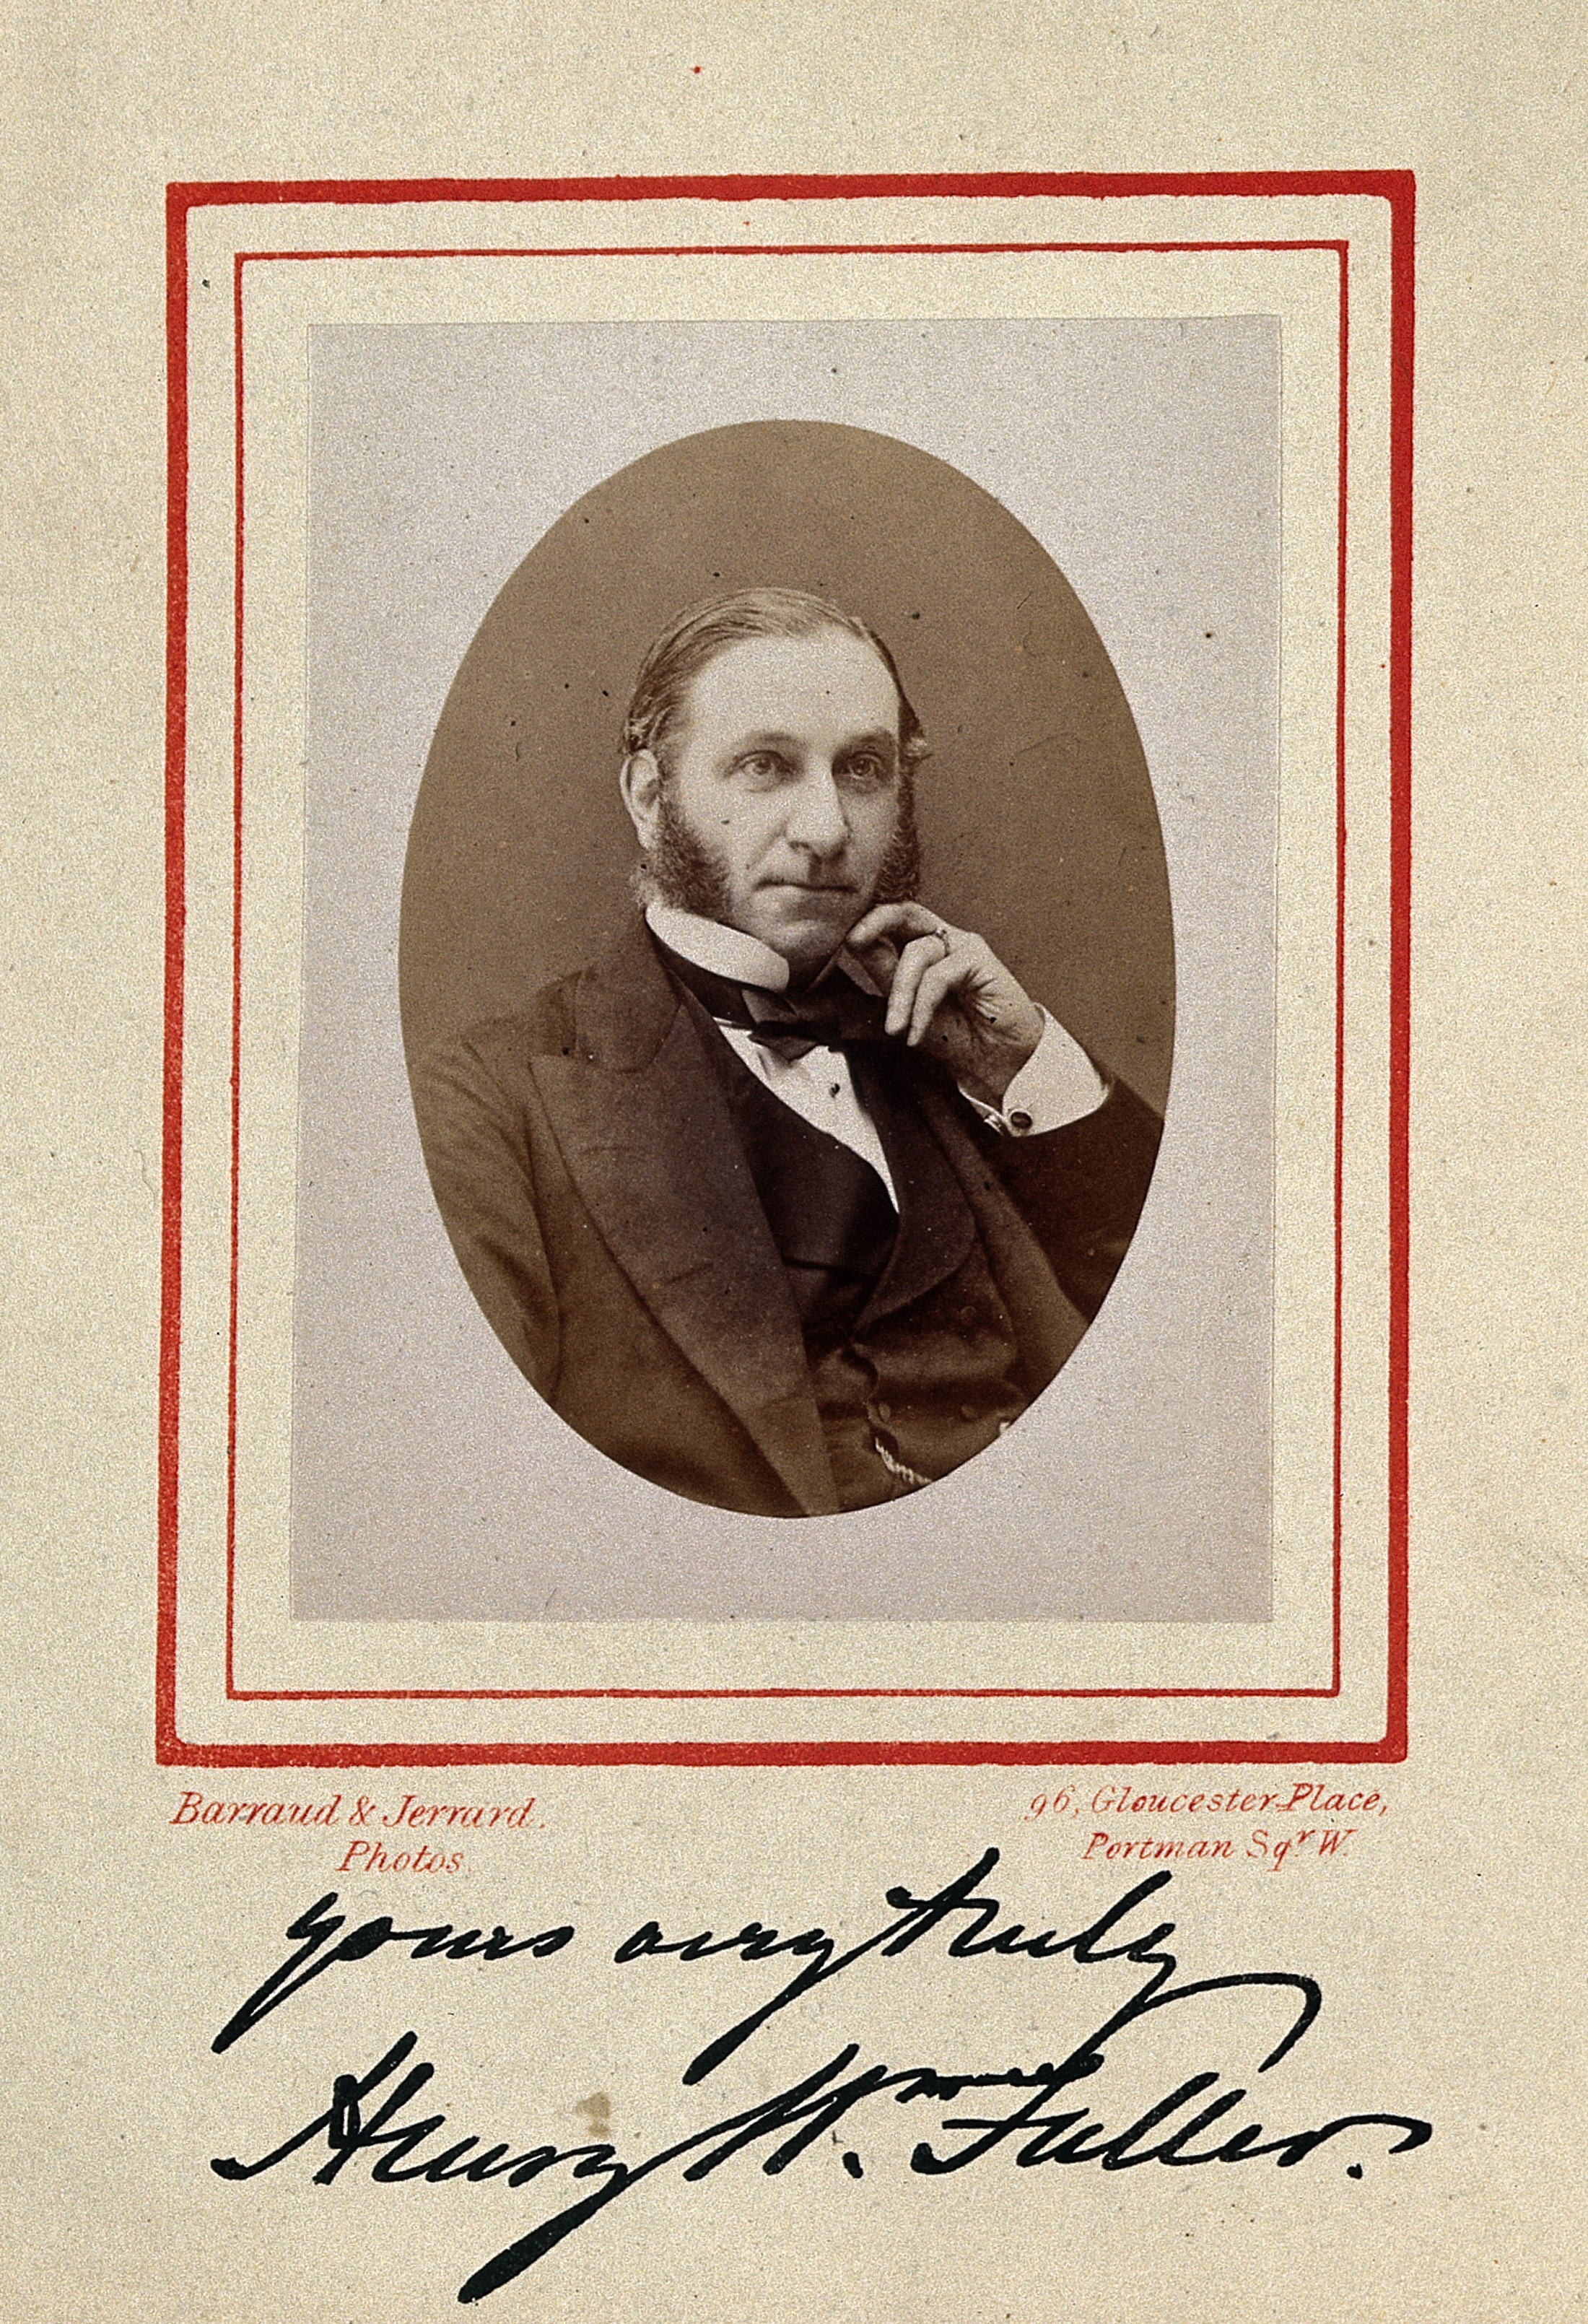 Henry William Fuller. Photograph by Barraud & Jerrard, 1873. Wellcome V0028381